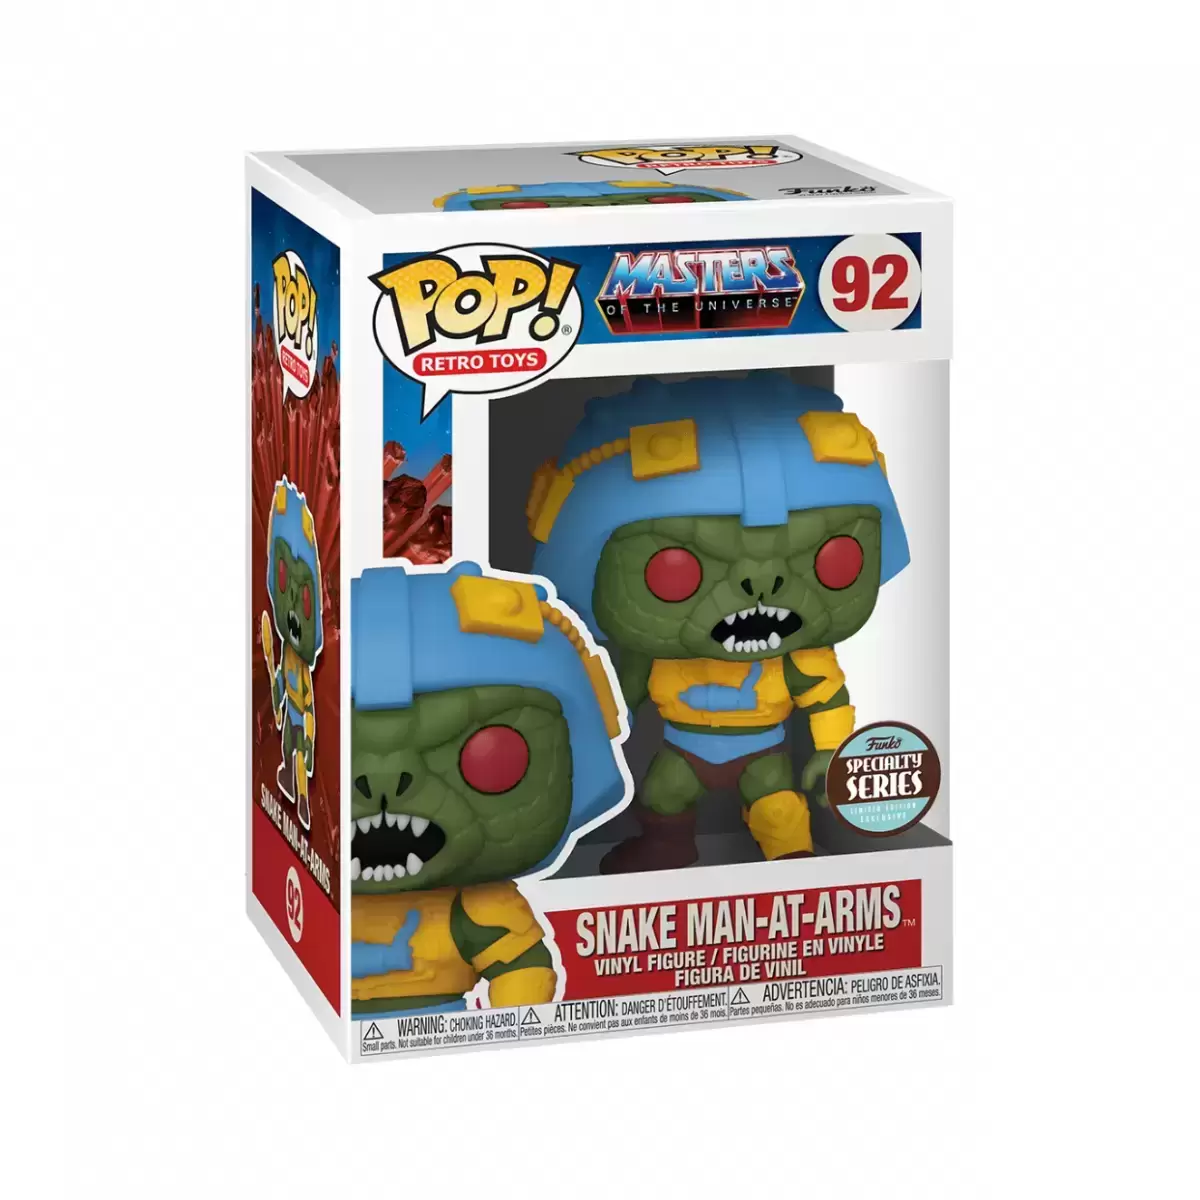 POP! Retro Toys - Masters of the Universe - Snake Man-At-Arms